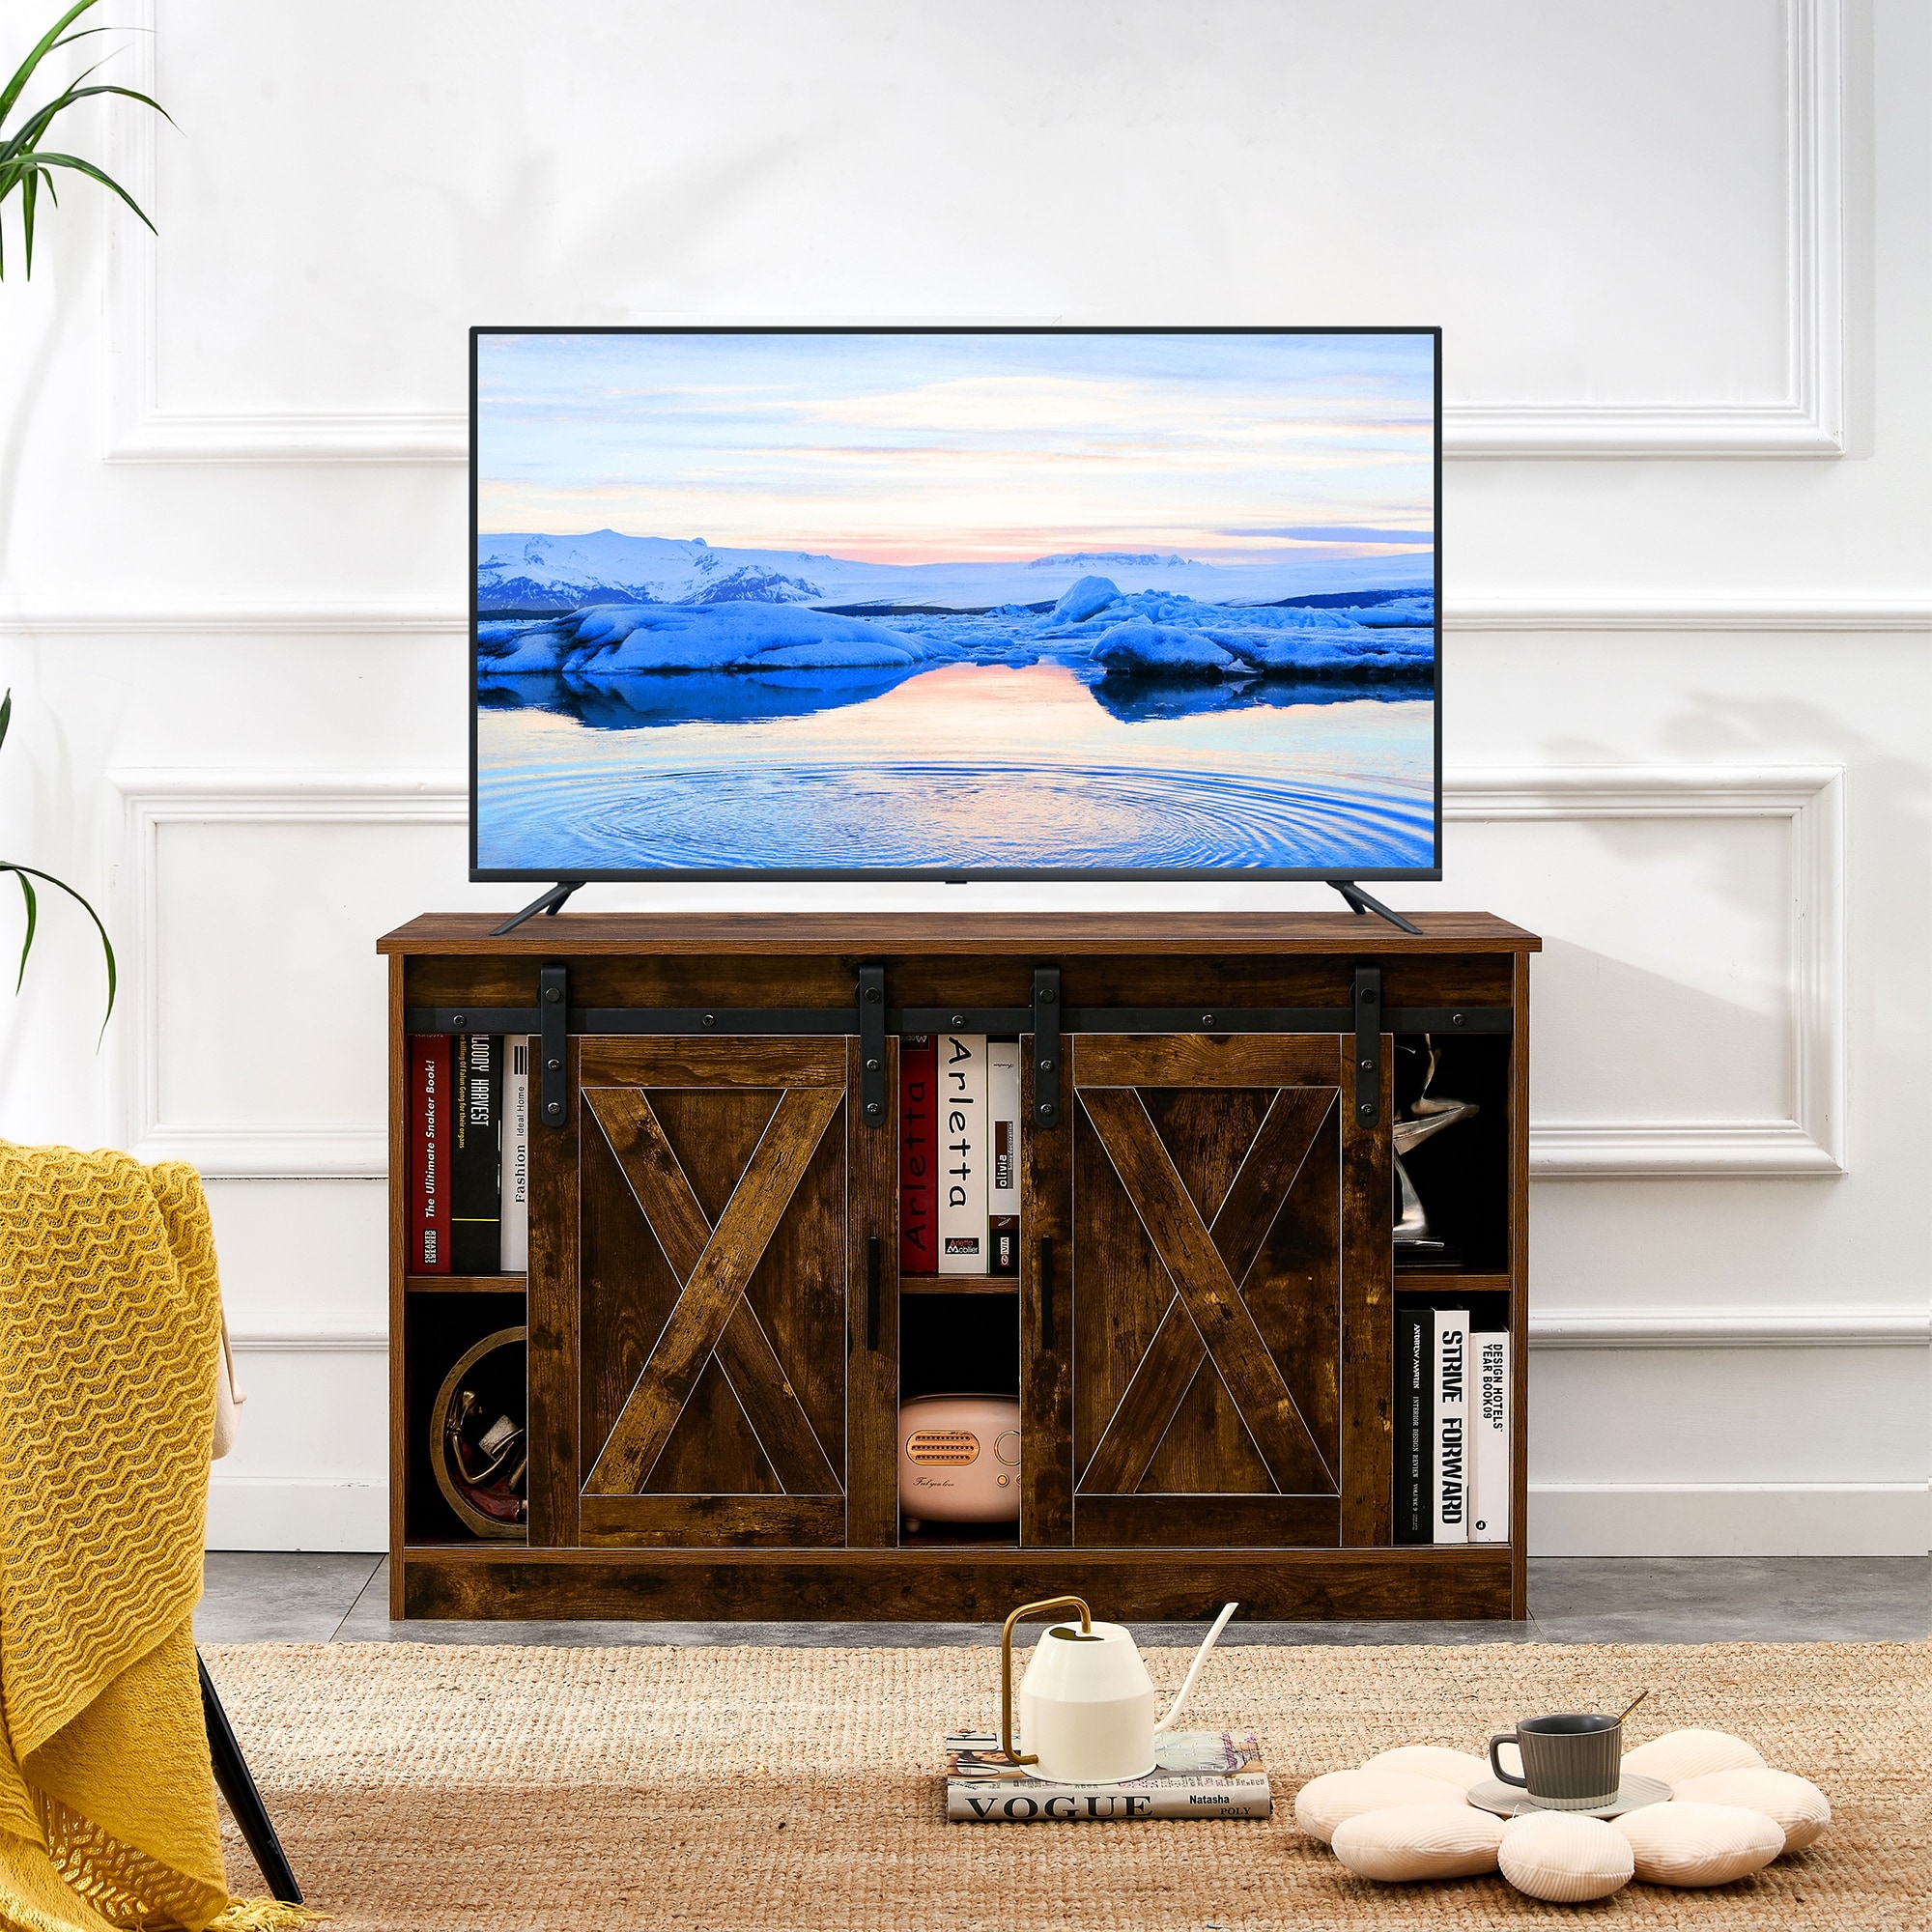 https://ak1.ostkcdn.com/images/products/is/images/direct/bfb82ce8efd8806401af2df0962c78ebe91d4a04/CTEX-Decorative-wooden-TV-storage-cabinet-with-two-sliding-barn-doors%2C-available-for-bedroom%2C-living-room.jpg